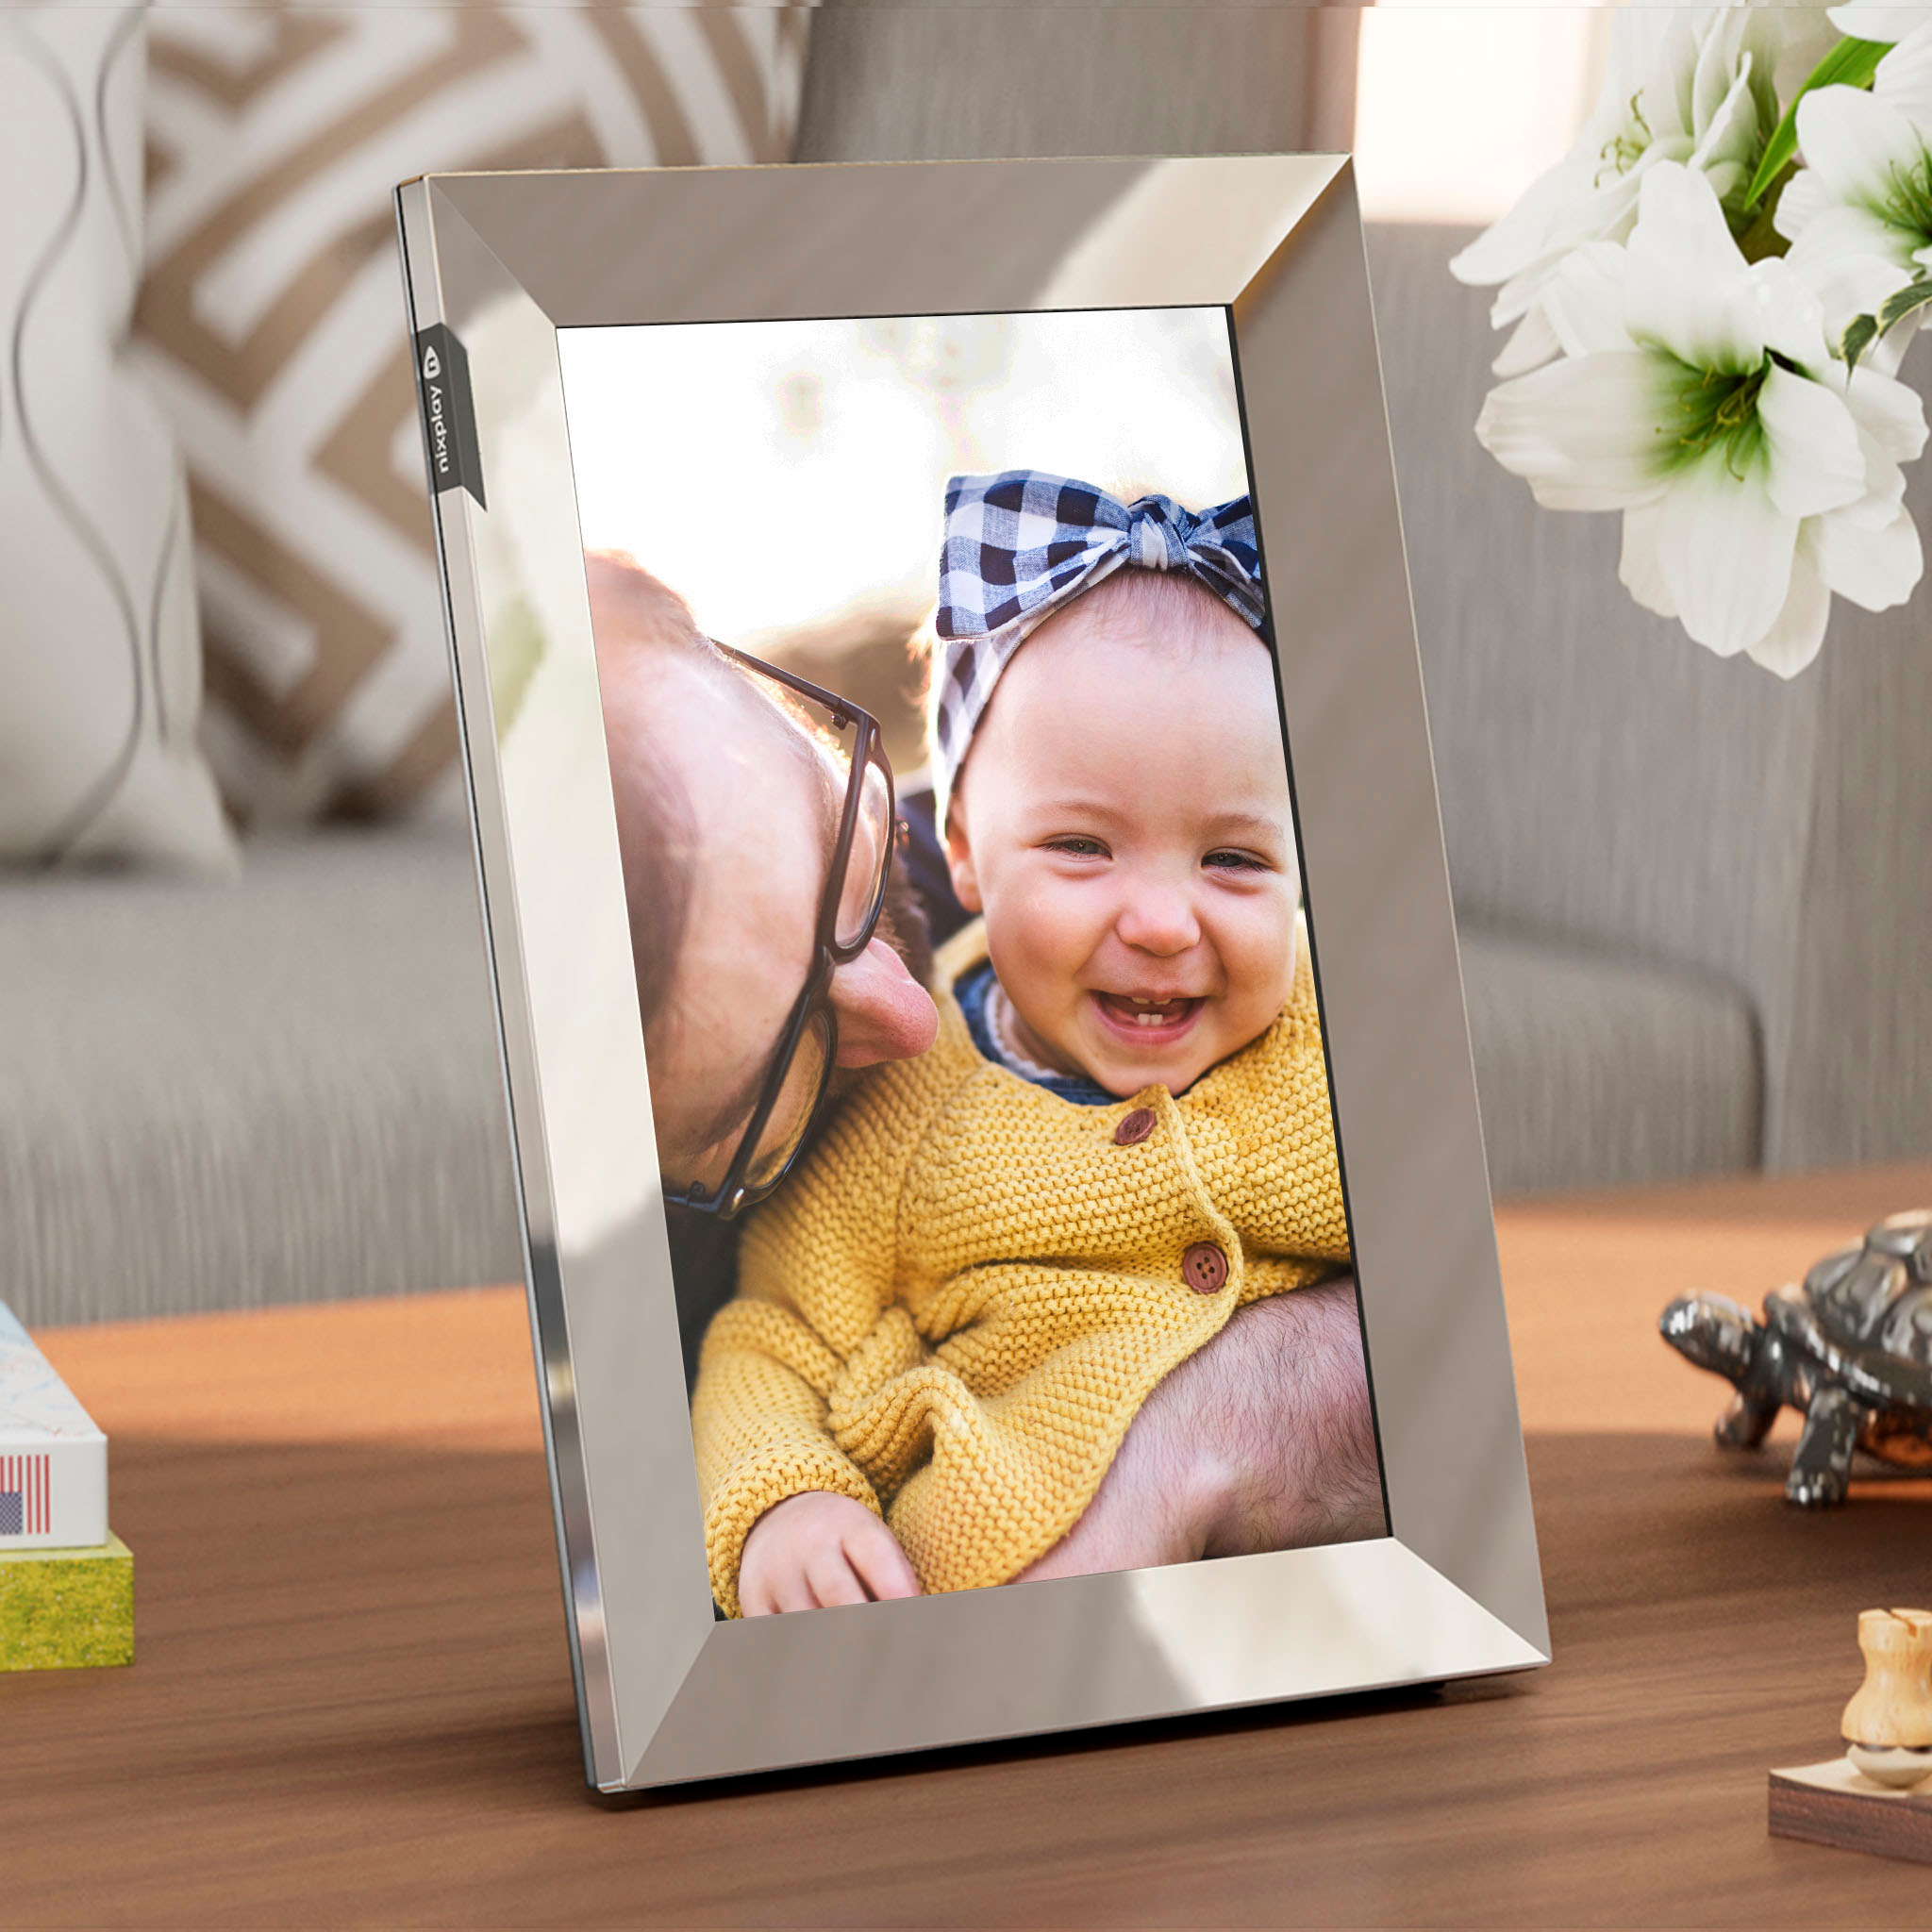 Left View: Nixplay - W10K Touch 10.1-inch LCD Smart Digital Photo Frame - Polished Steel